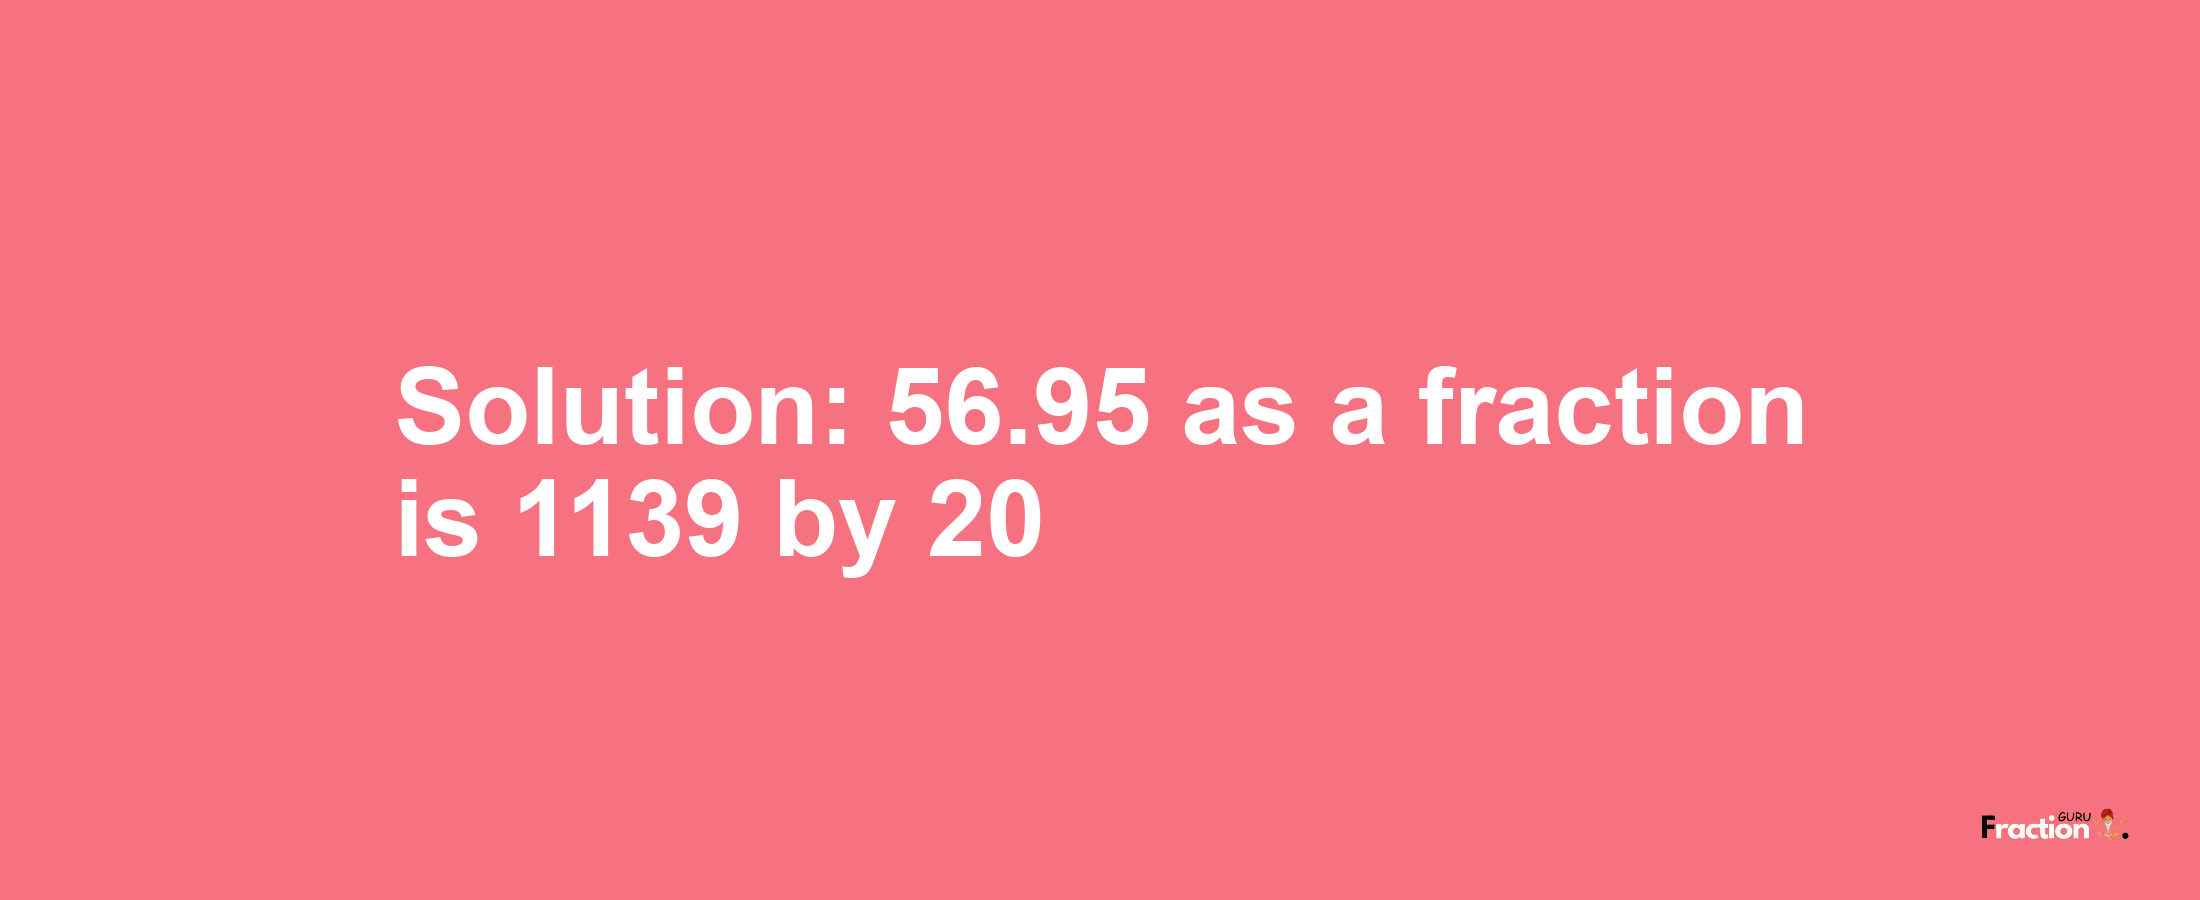 Solution:56.95 as a fraction is 1139/20